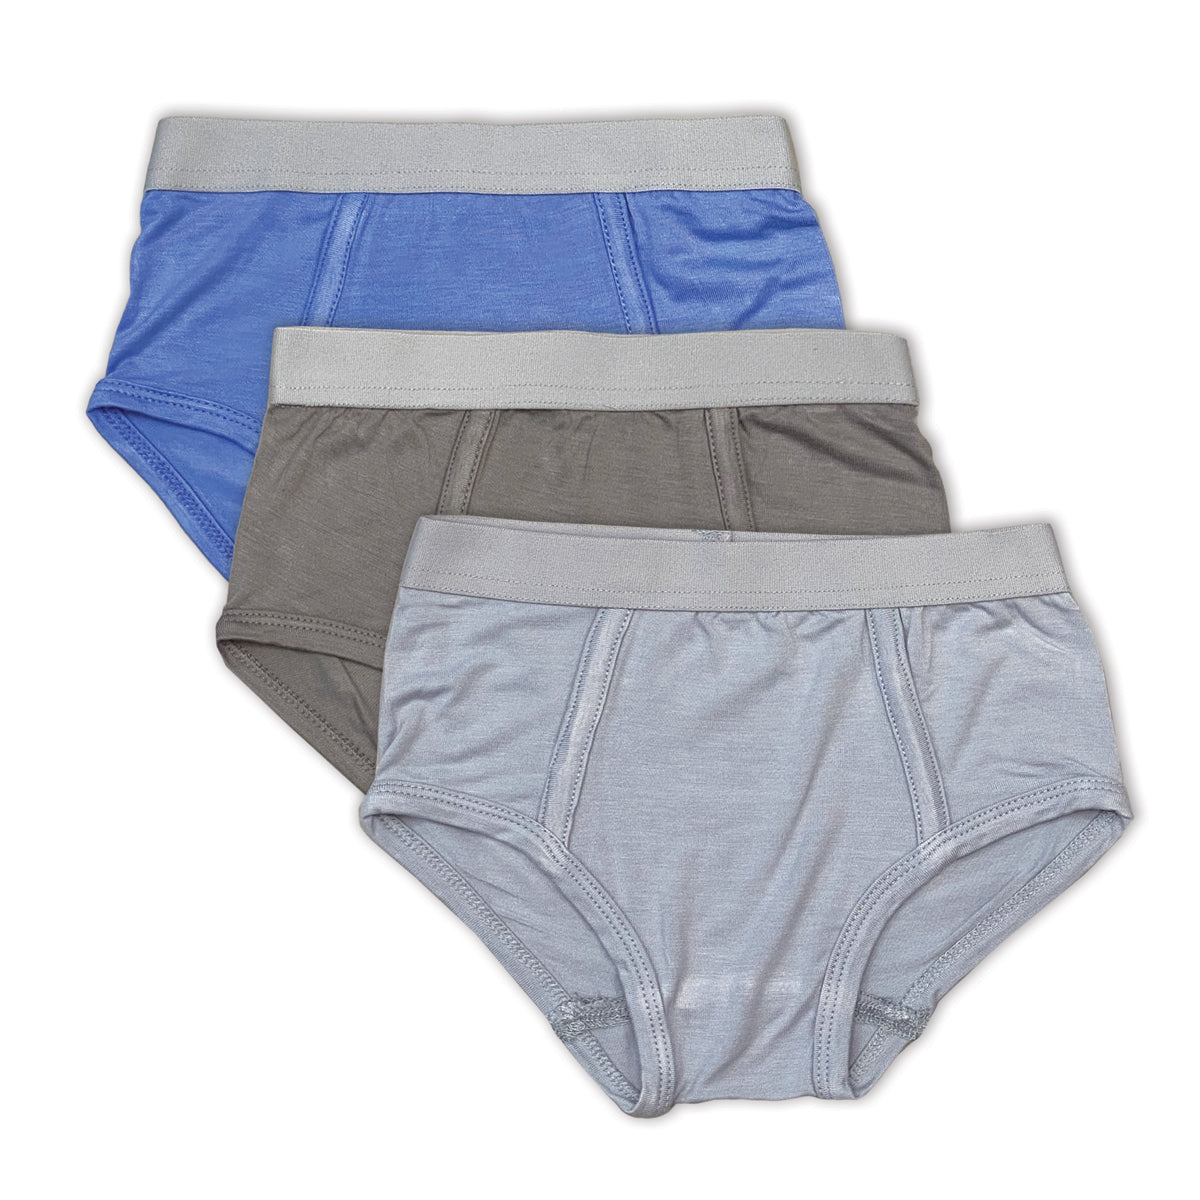 stafford size 48 6 pack mens briefs